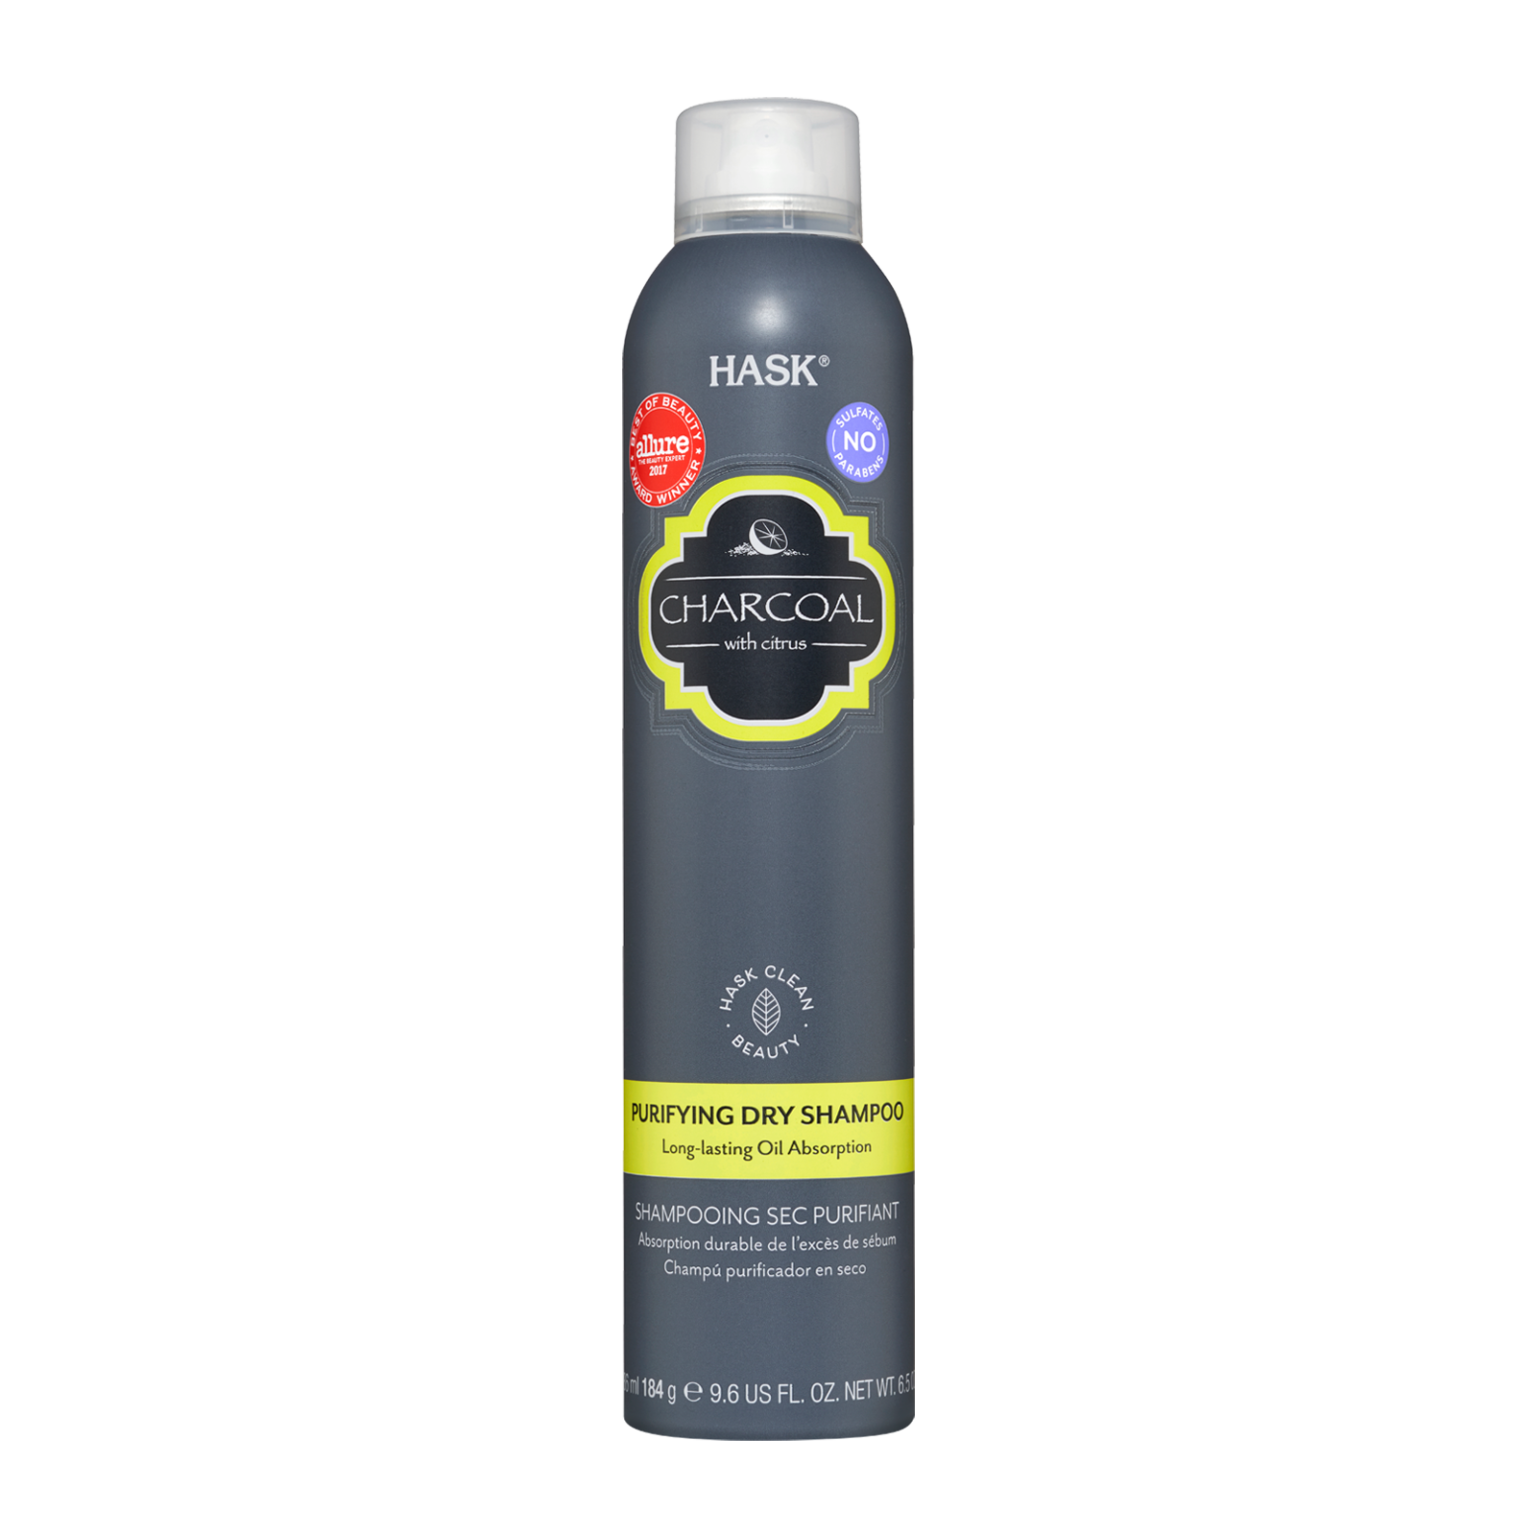 Hask Charcoal With Citrus Purifying Dry Shampoo